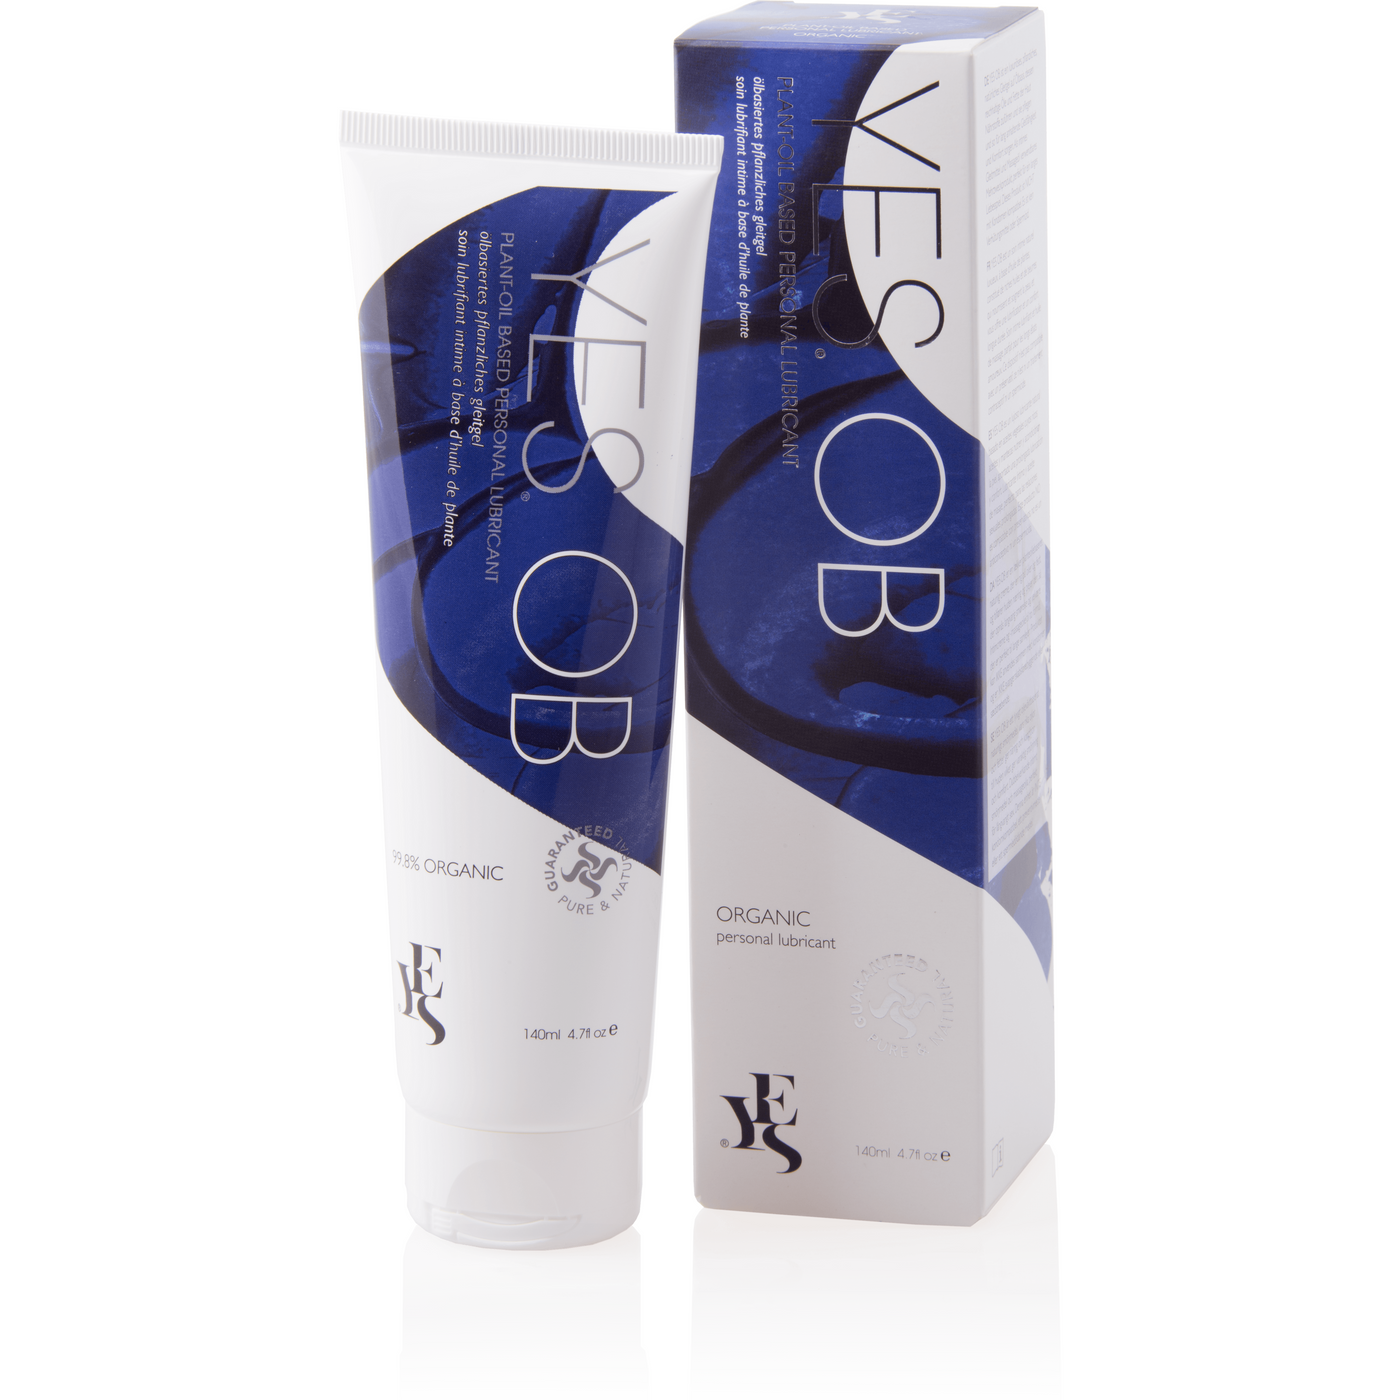 YES Natural Plant-Oil Based Personal Lubricant-140ml